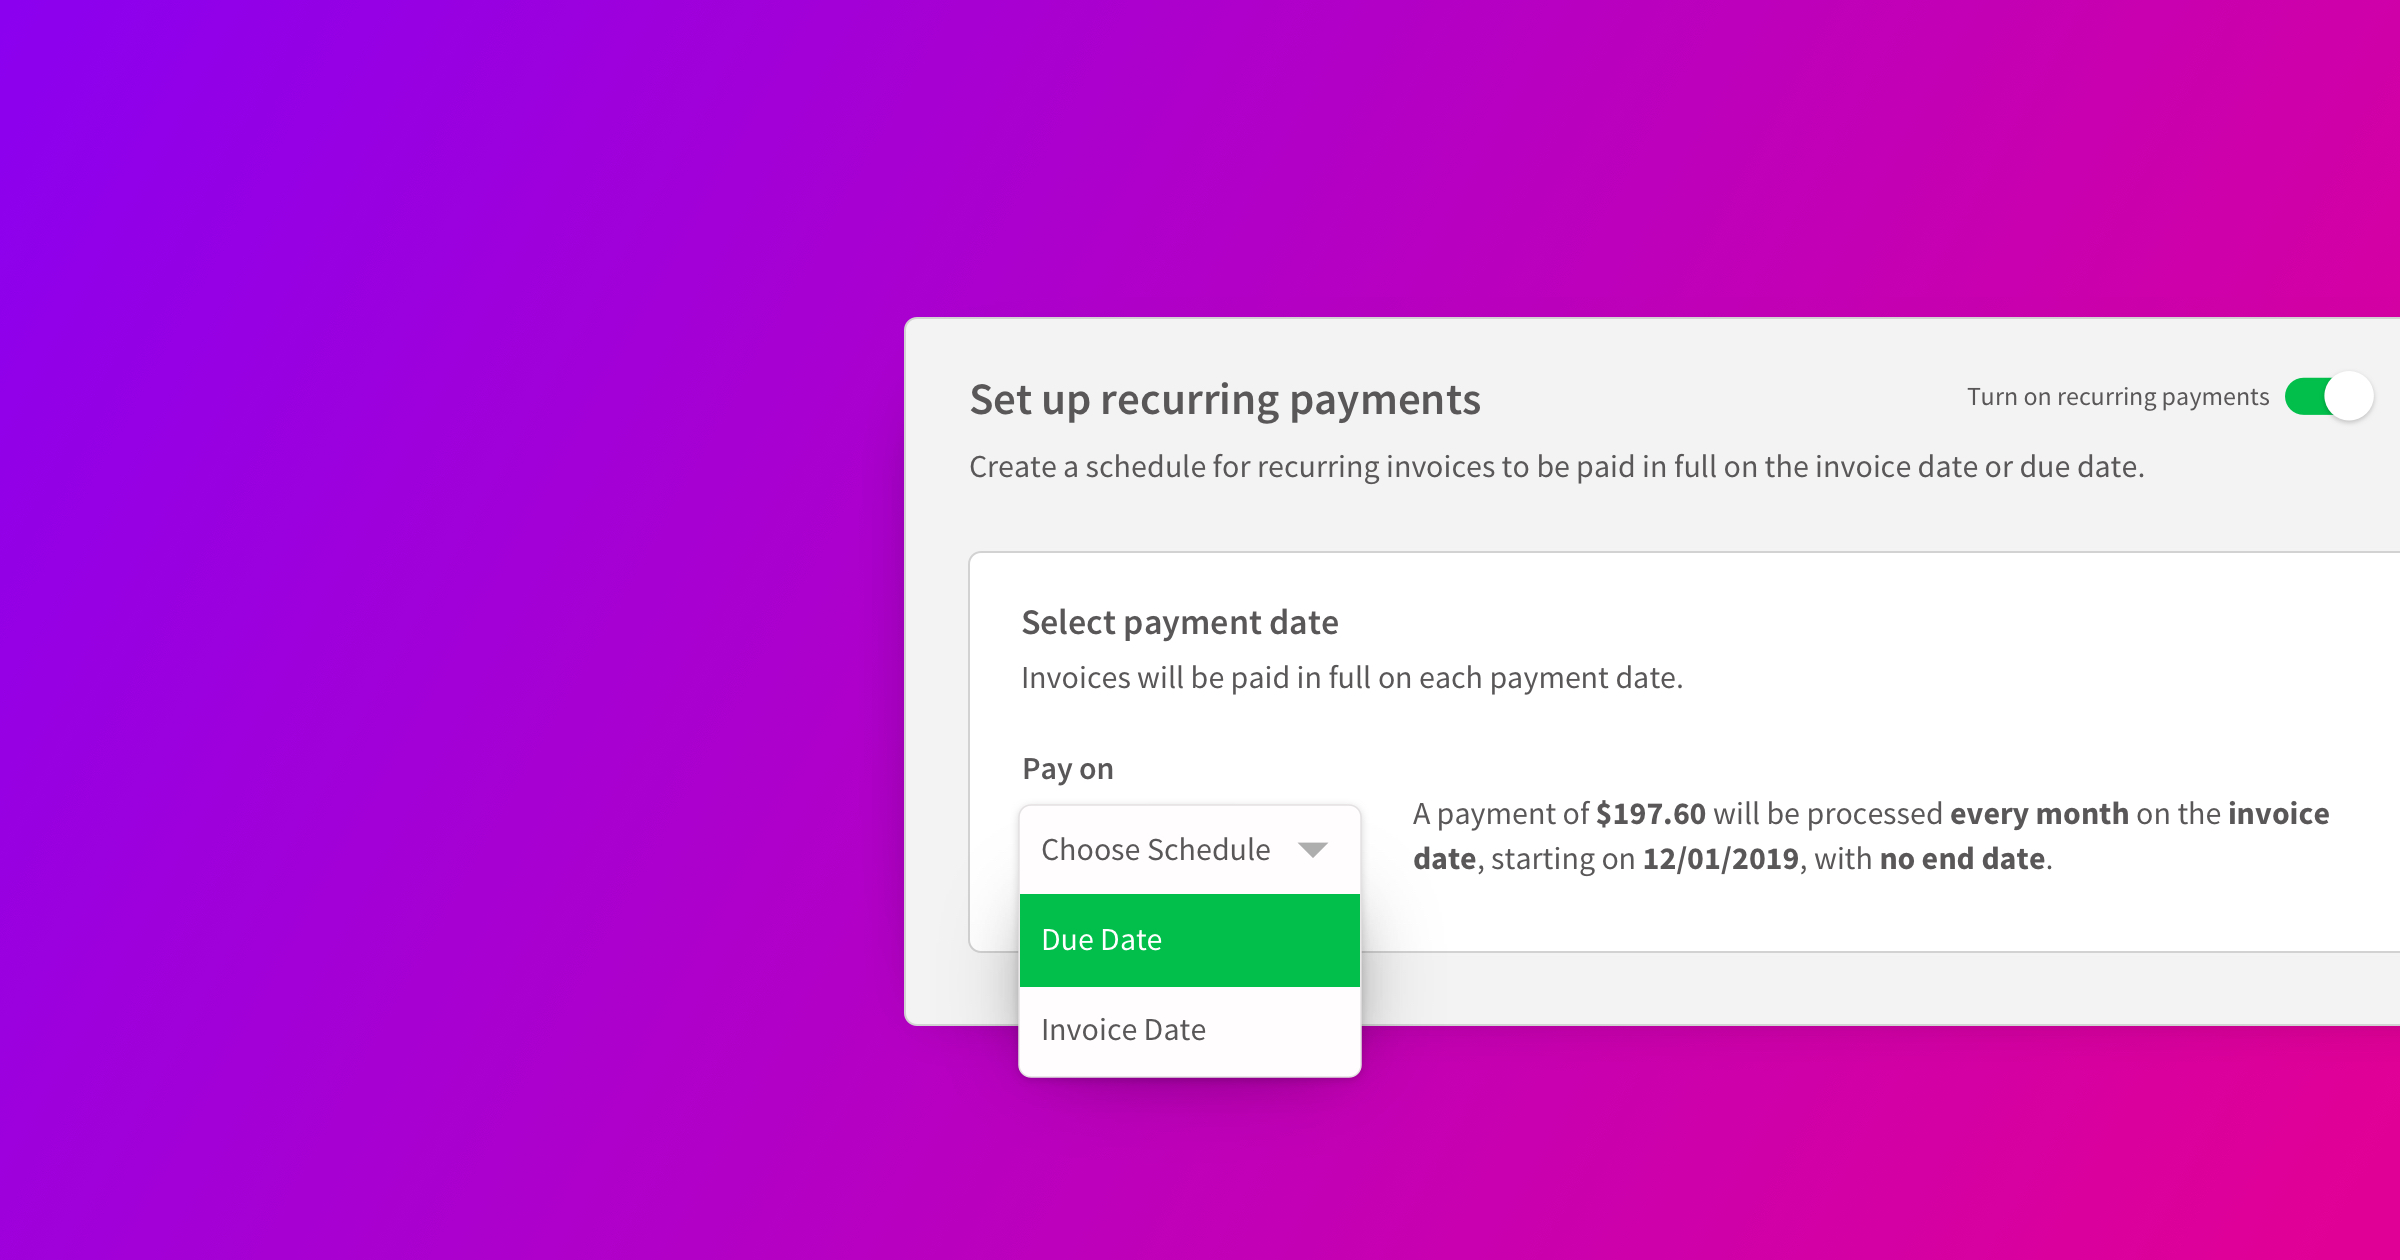 Feature Updates: Client Requests in the Task Workspace, Recurring Payments